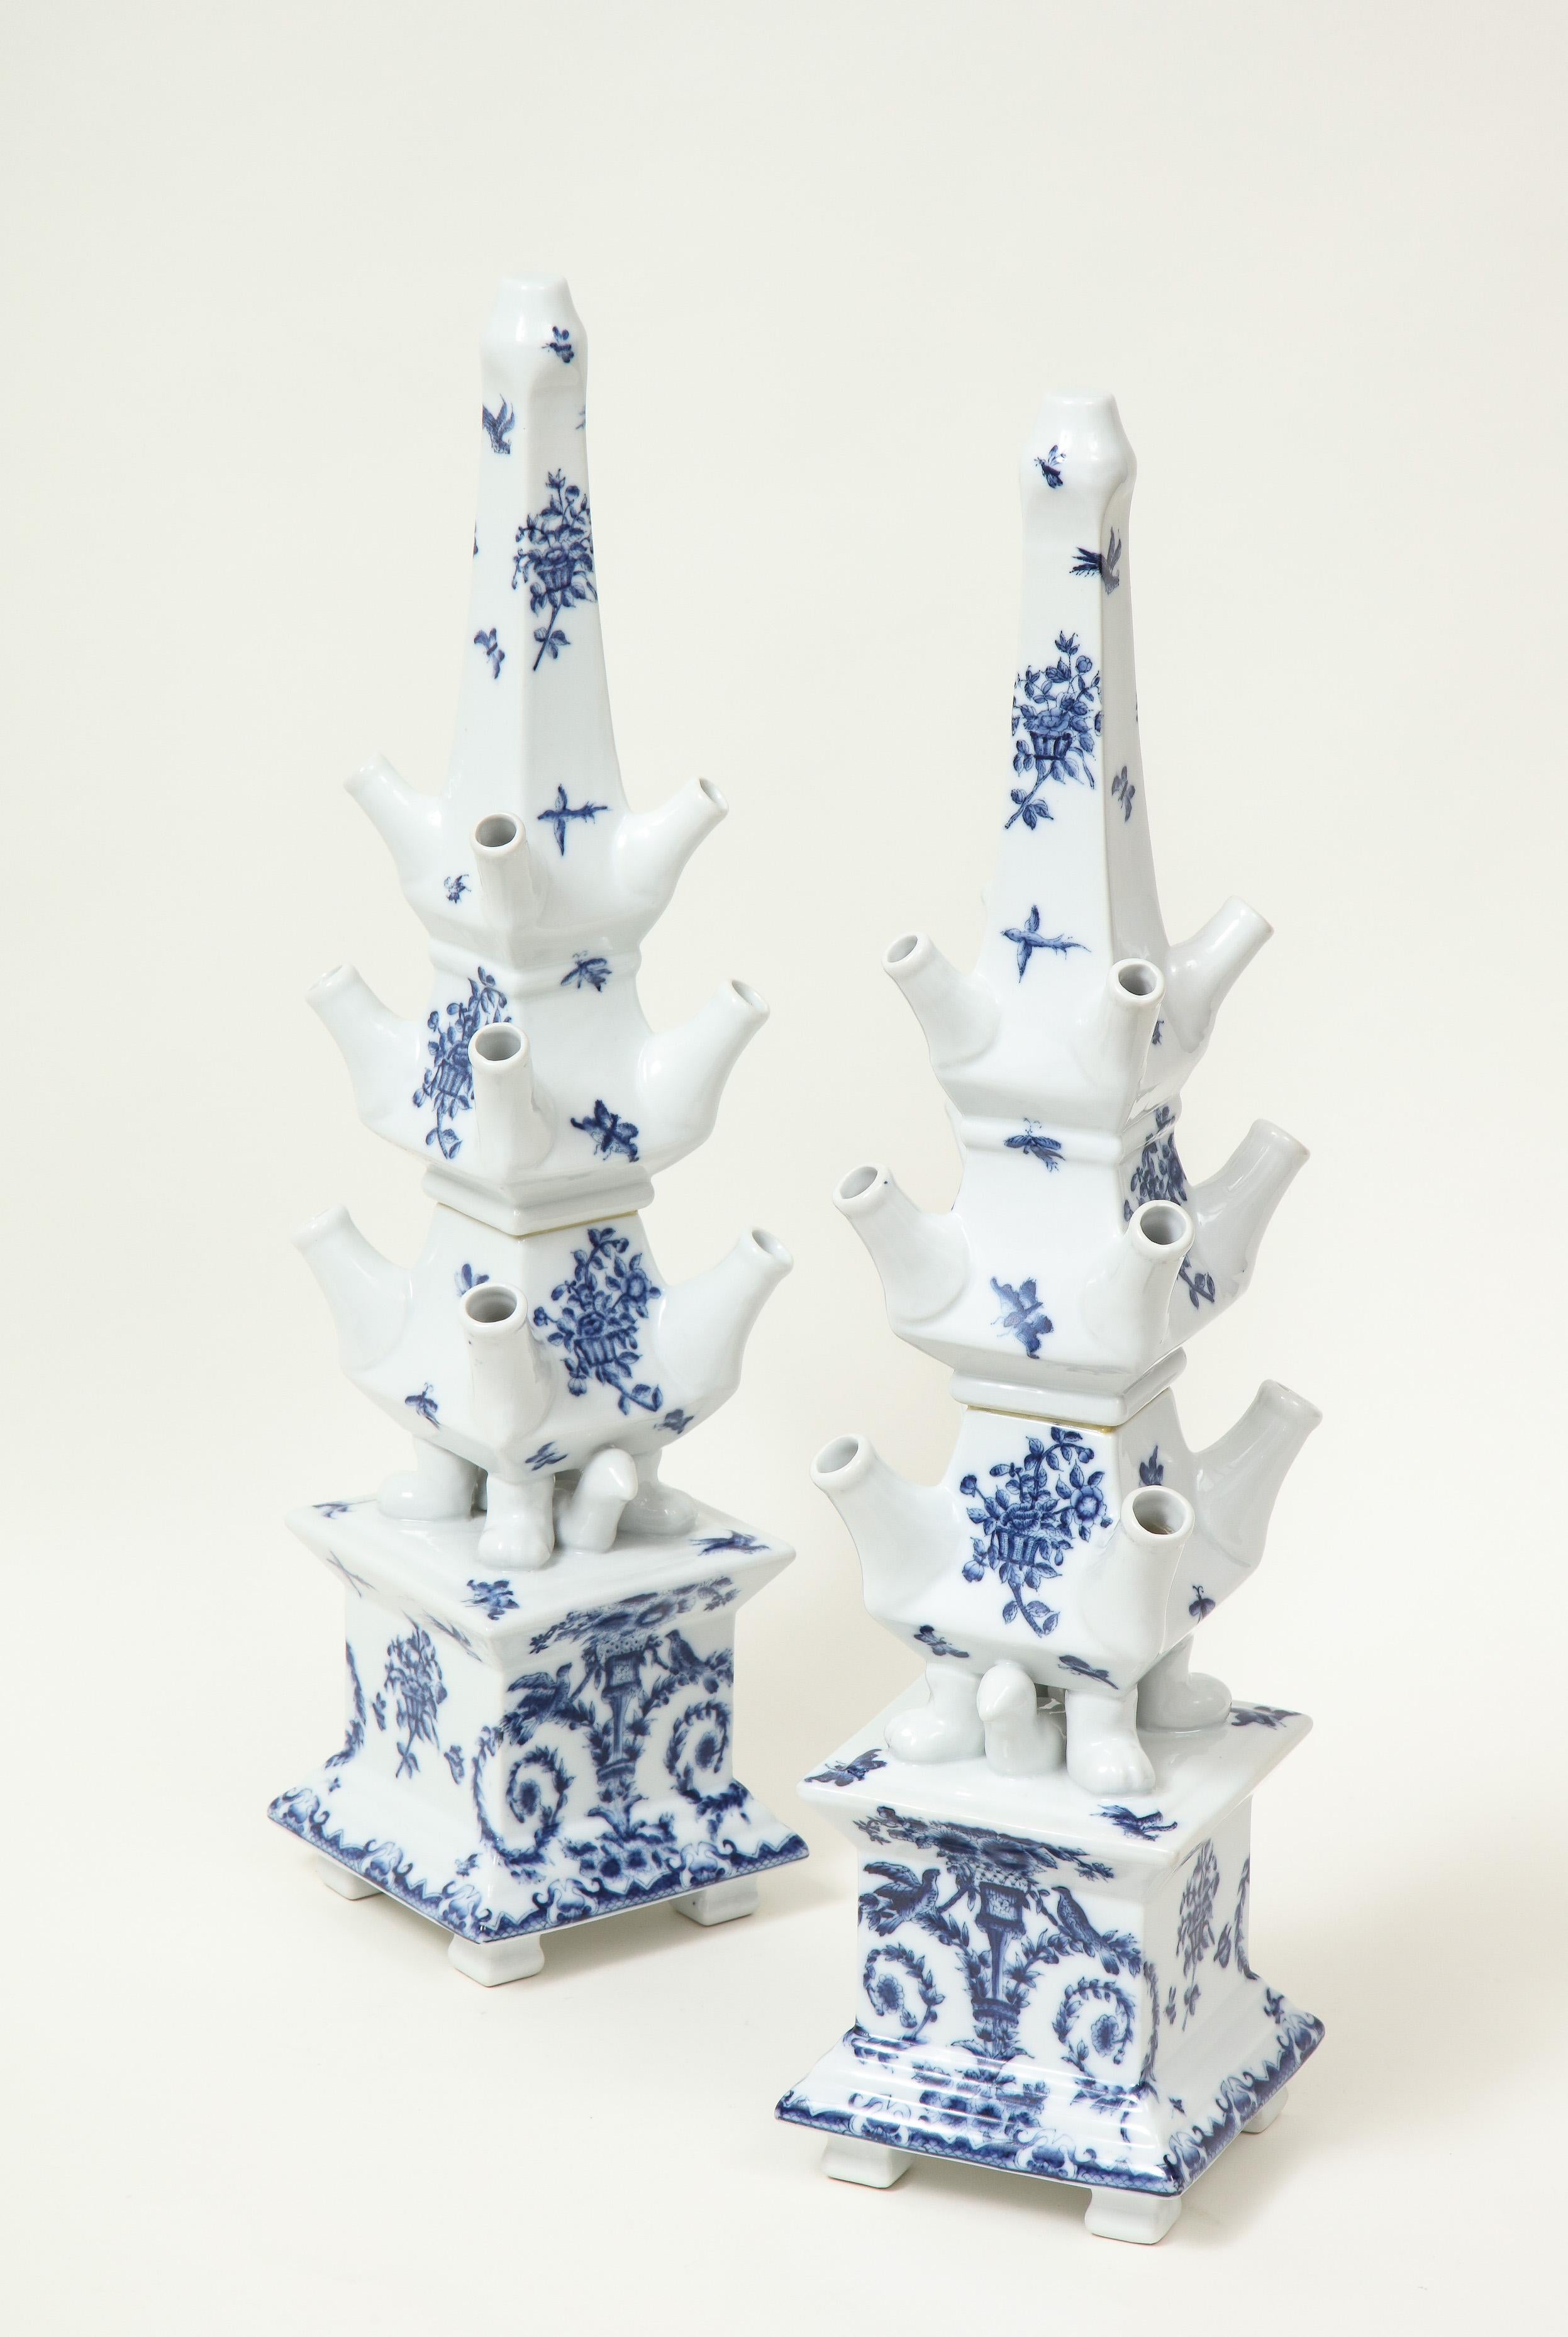 Each of pyramids form with tiers of openings to receive flower stems; decorated overall in blue with baskets of flowers butterflies.

Provenance: From the collection of Mario Buatta and used in one of his show house rooms.